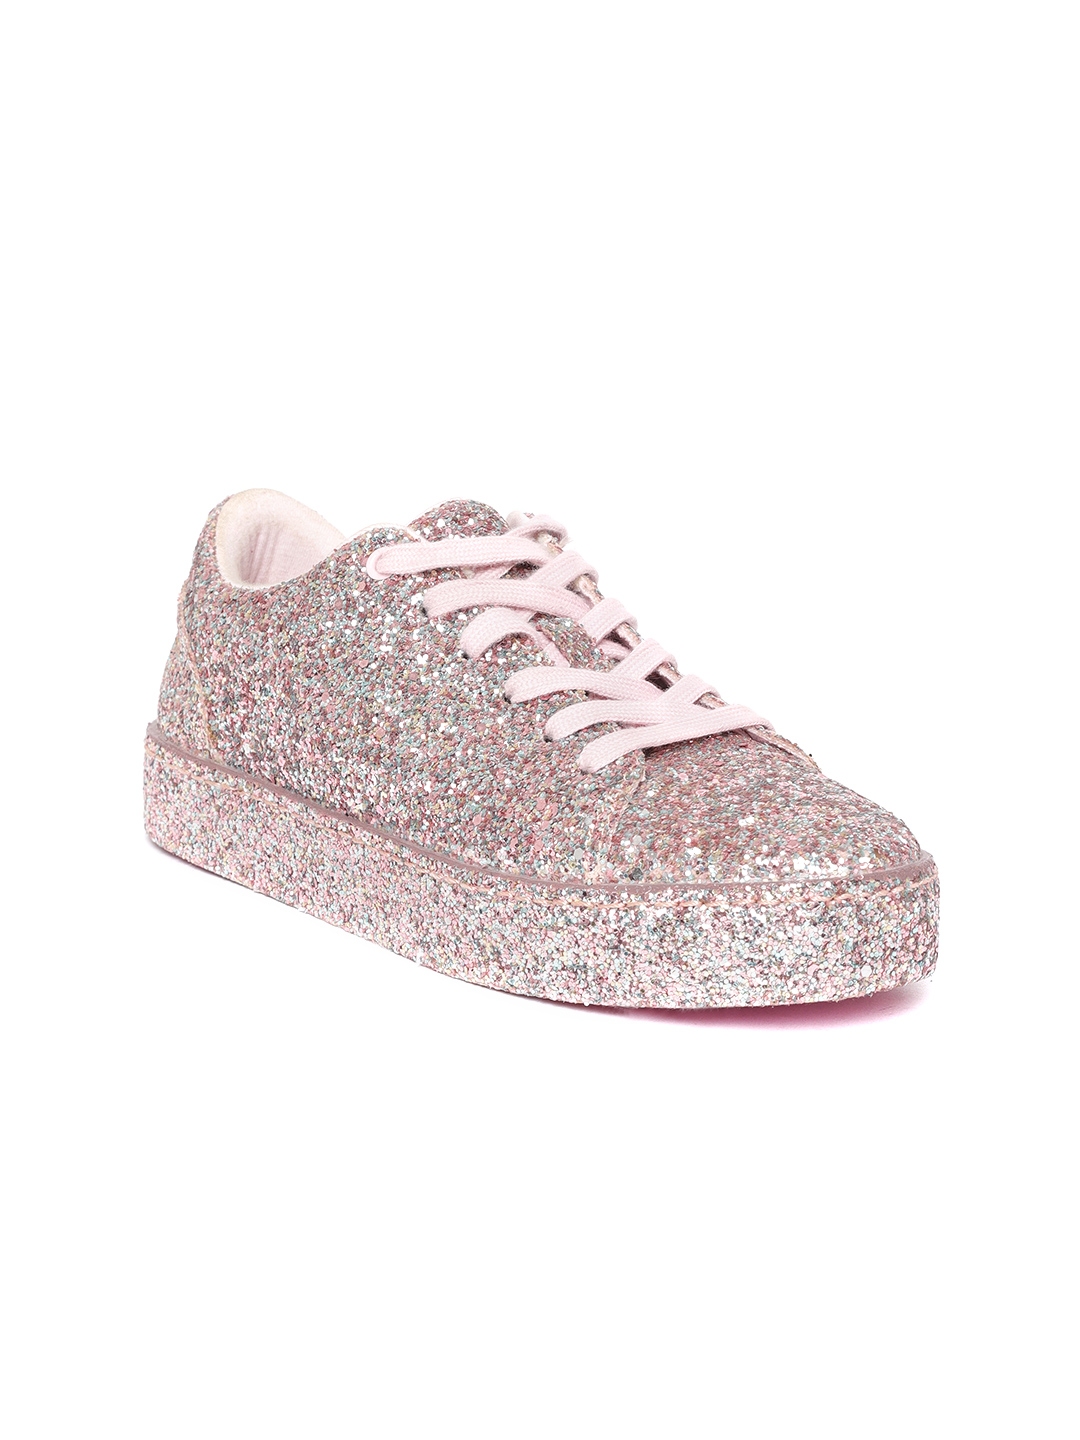 Buy ALDO Rose Gold Toned Embellished Sneakers - for Women 7189966 | Myntra